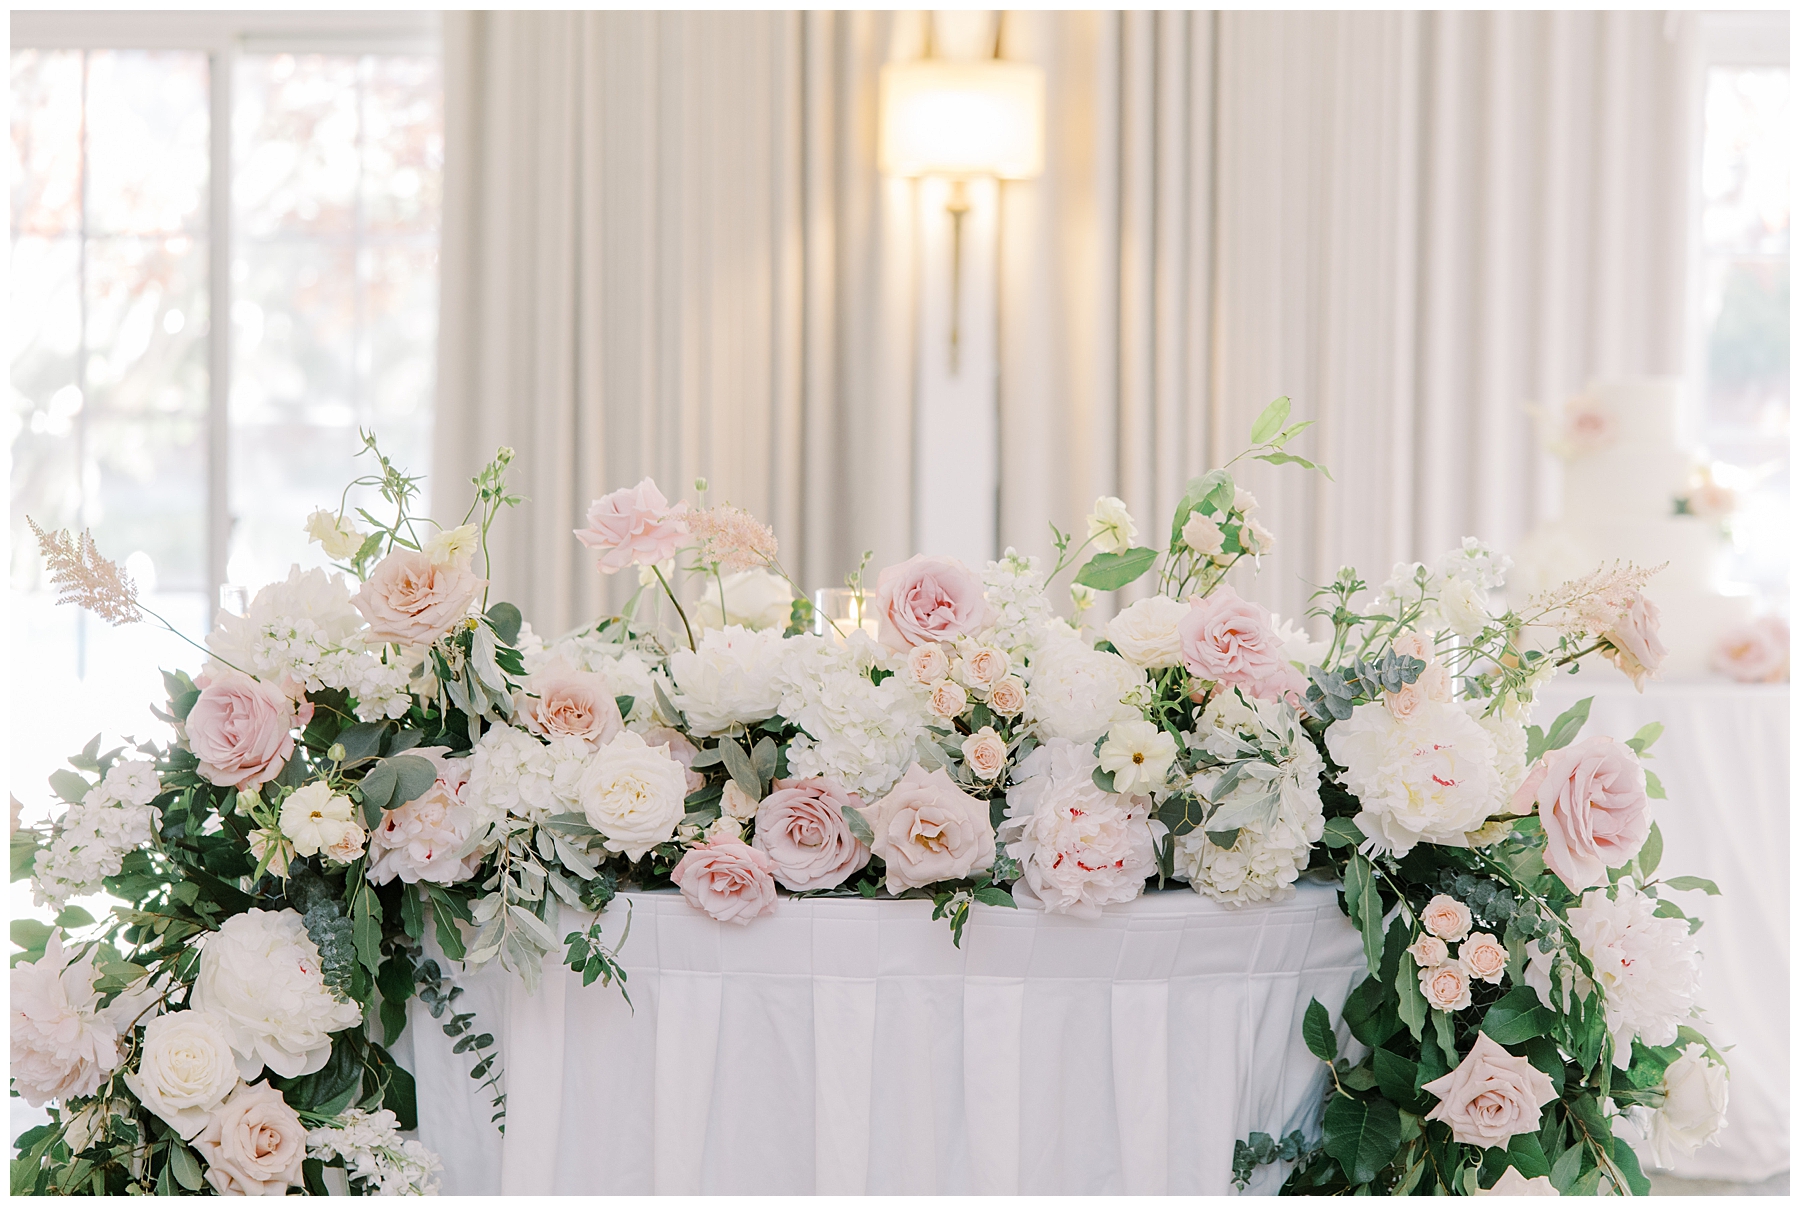 Sweetheart table at Cape Cod wedding 